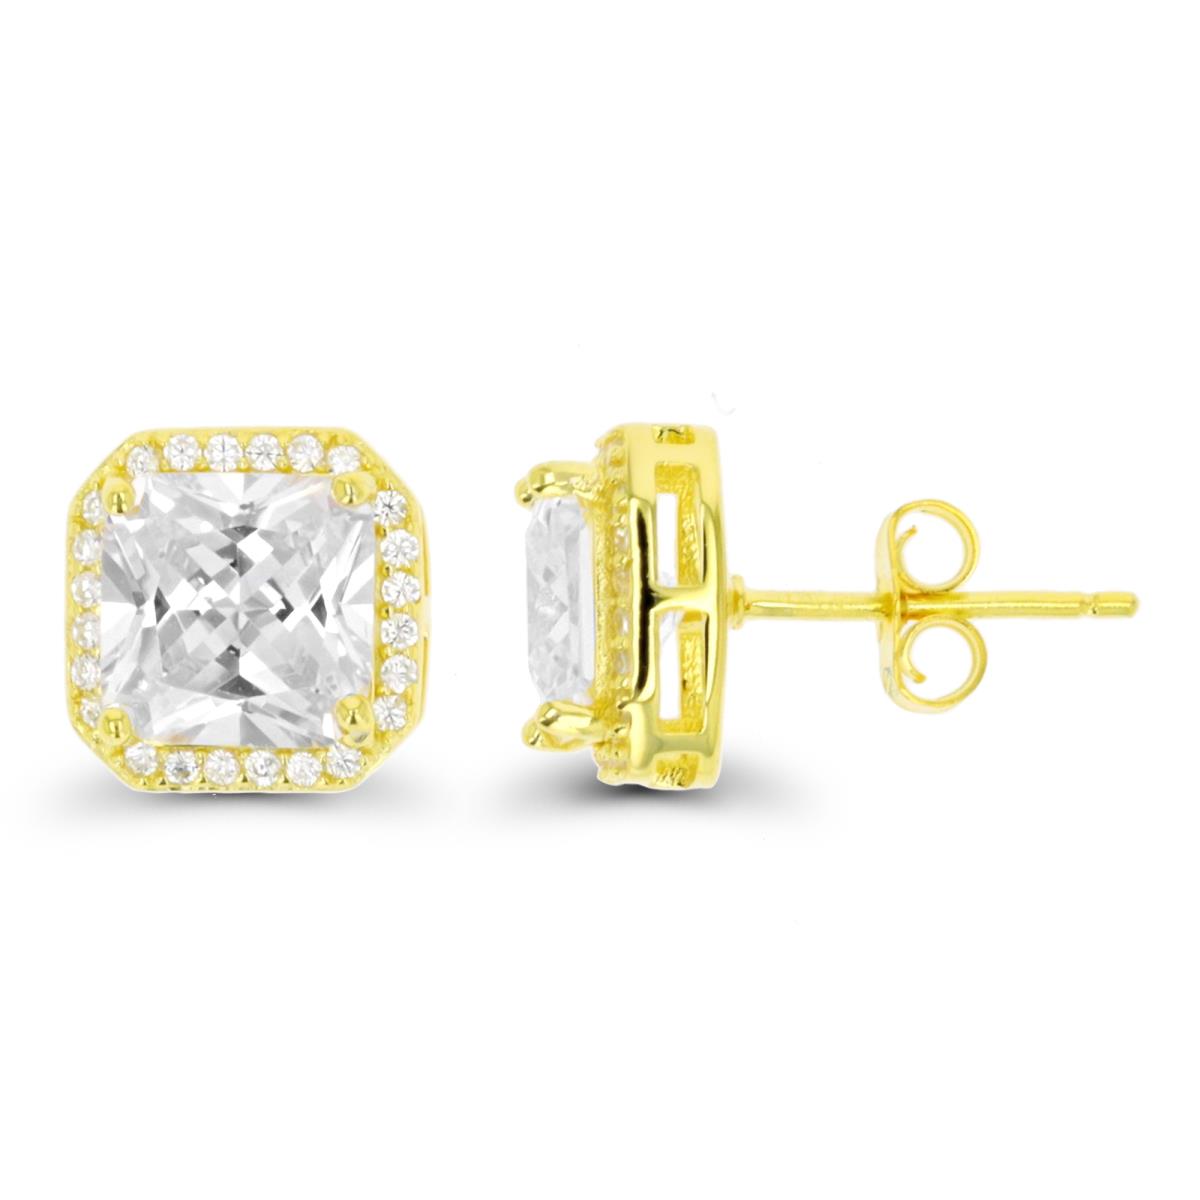 Sterling Silver Yellow 1-Micron 8mm Square CZ Halo Stud Earring